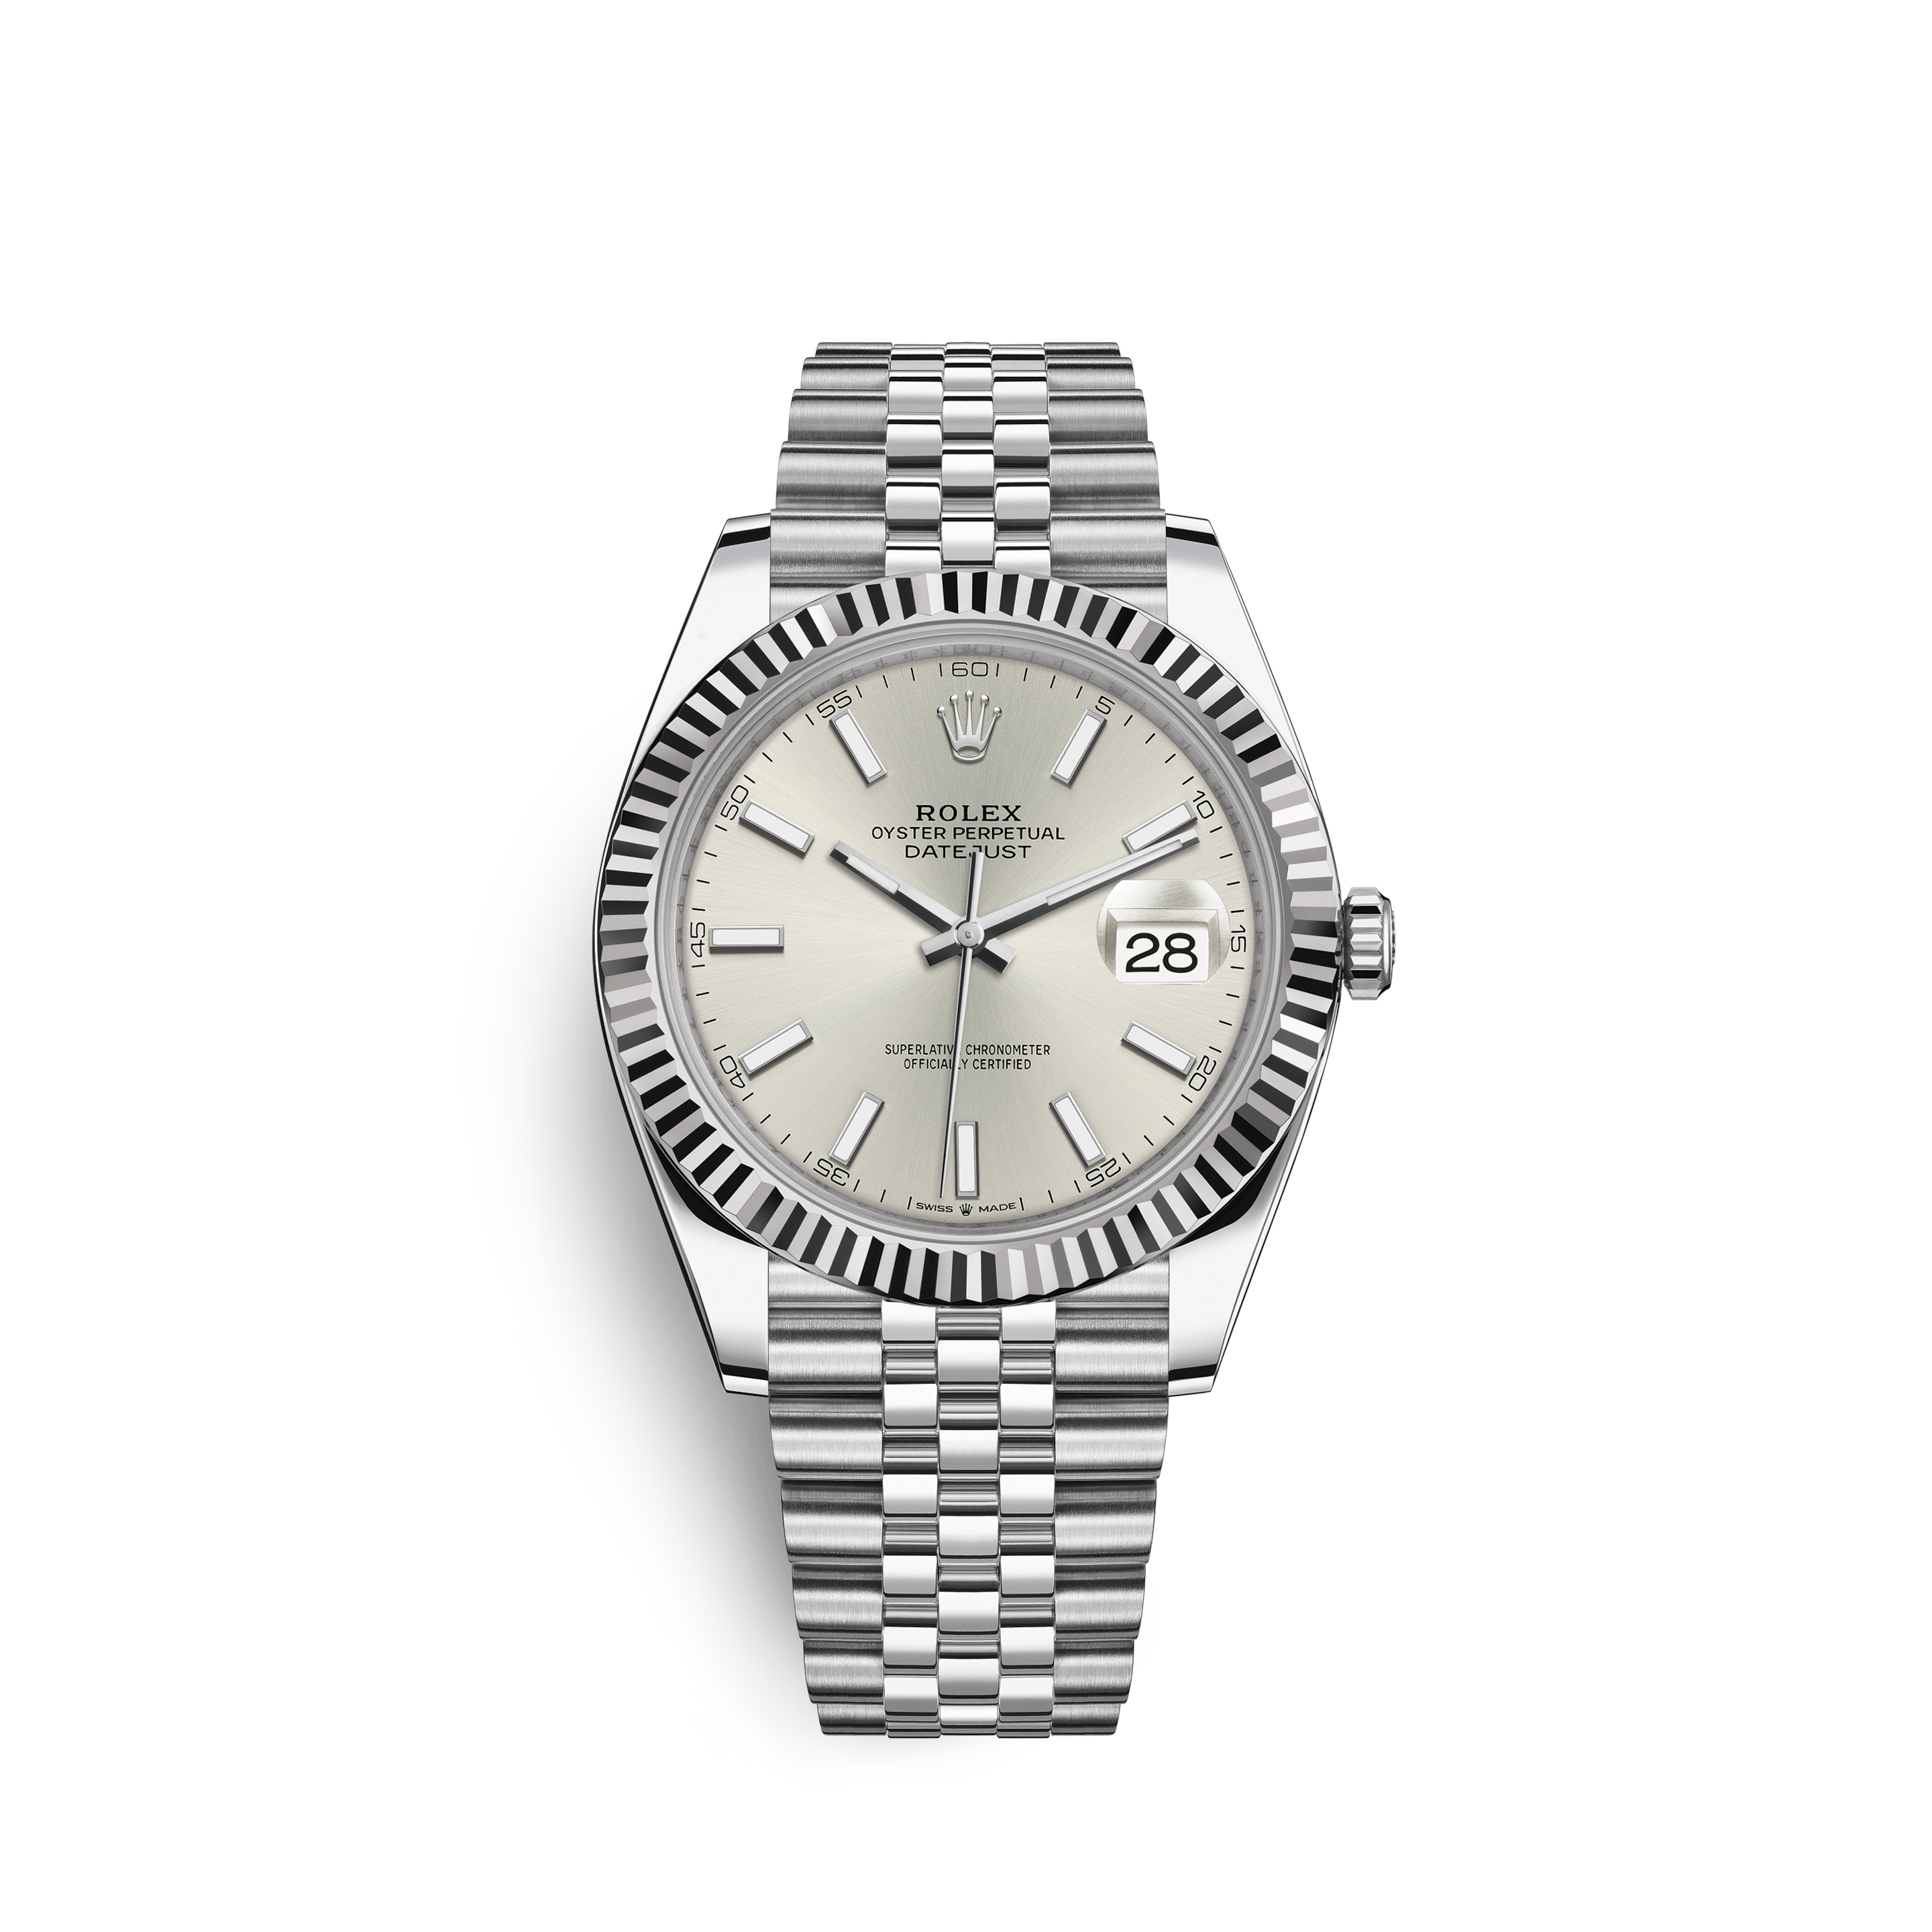 Rolex Ladies Customized Rolex watch 26mm Datejust Stainless Steel White Color Dial with Diamond Accent RRT